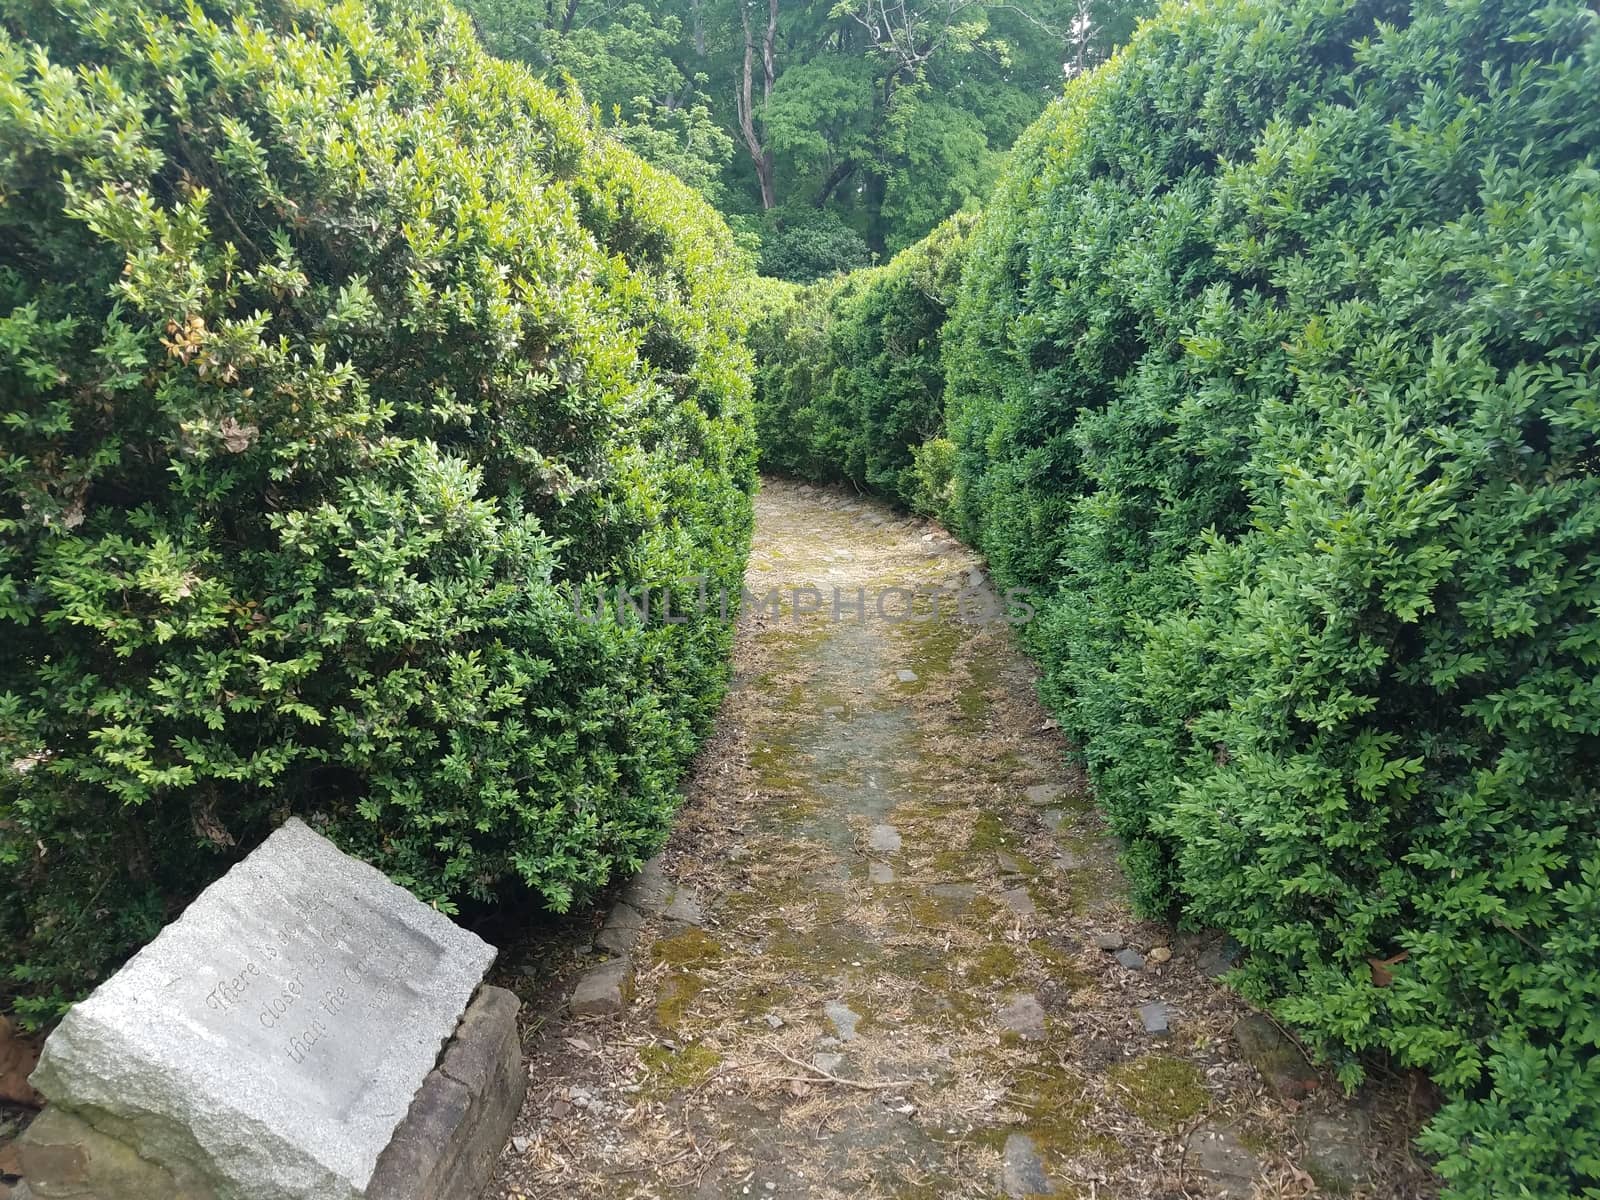 old brick path or trail in the garden with green bushes and stone inscription by stockphotofan1